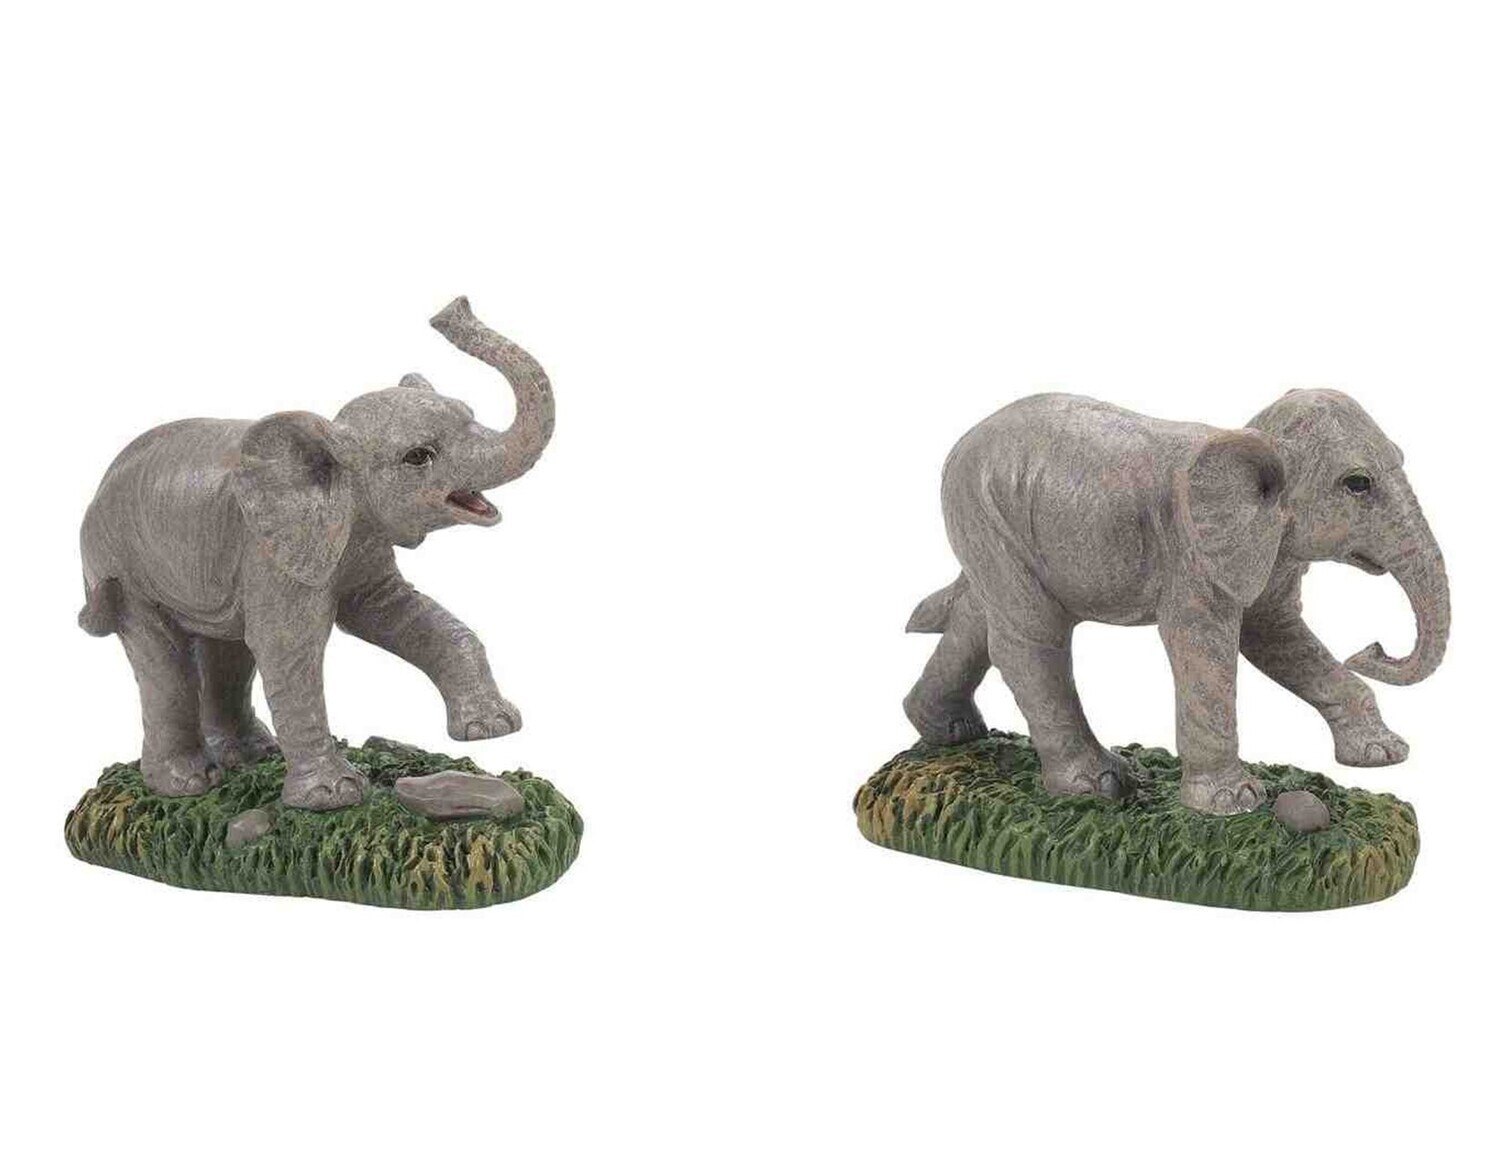 Department 56 Dickens Village "Zoological Society Elephants" Set of 2 (60114531)